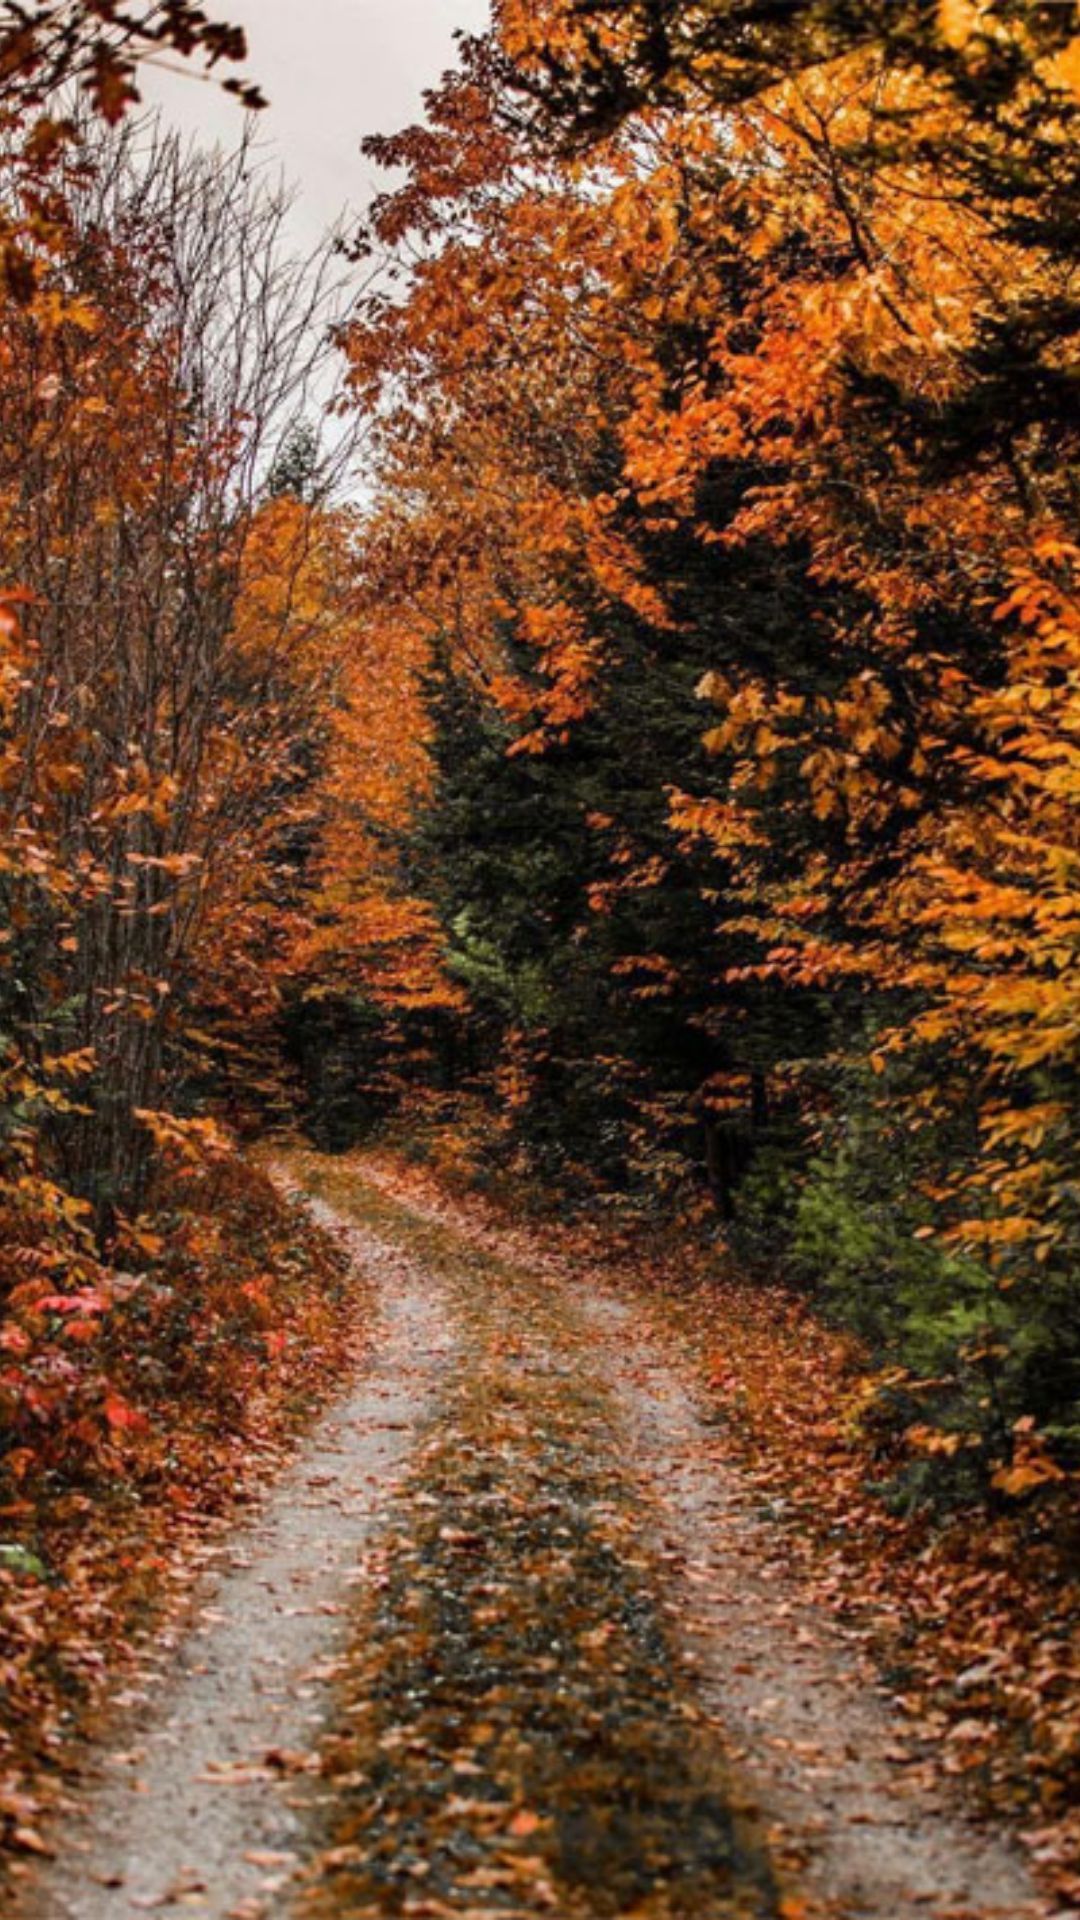 A dirt road in the fall with trees and leaves - Fall iPhone